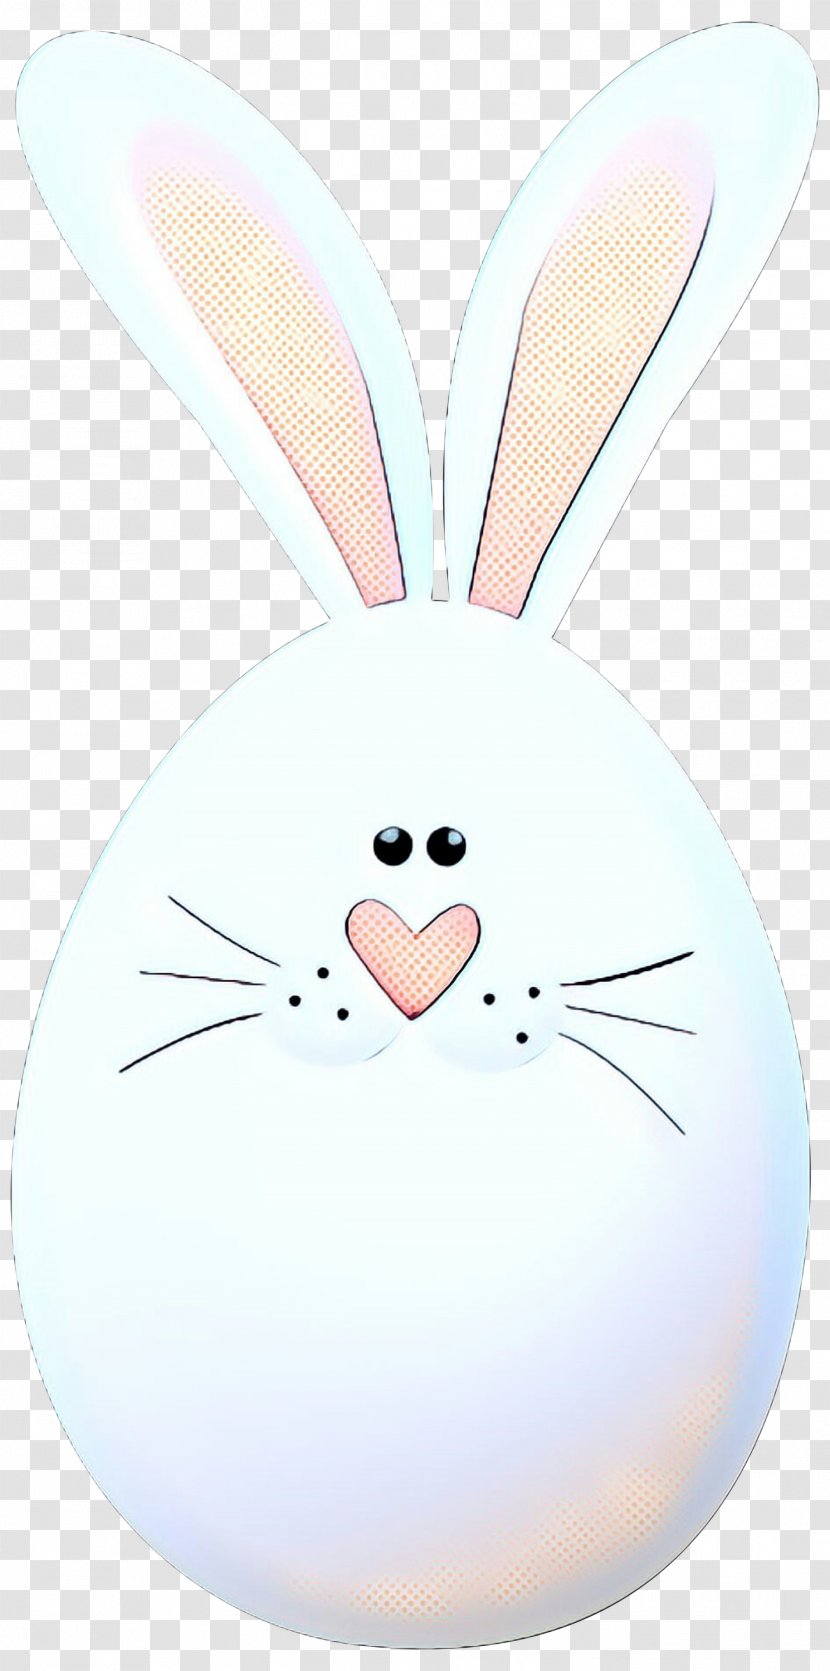 Rabbit Easter Bunny Hare Illustration Whiskers - White Transparent PNG